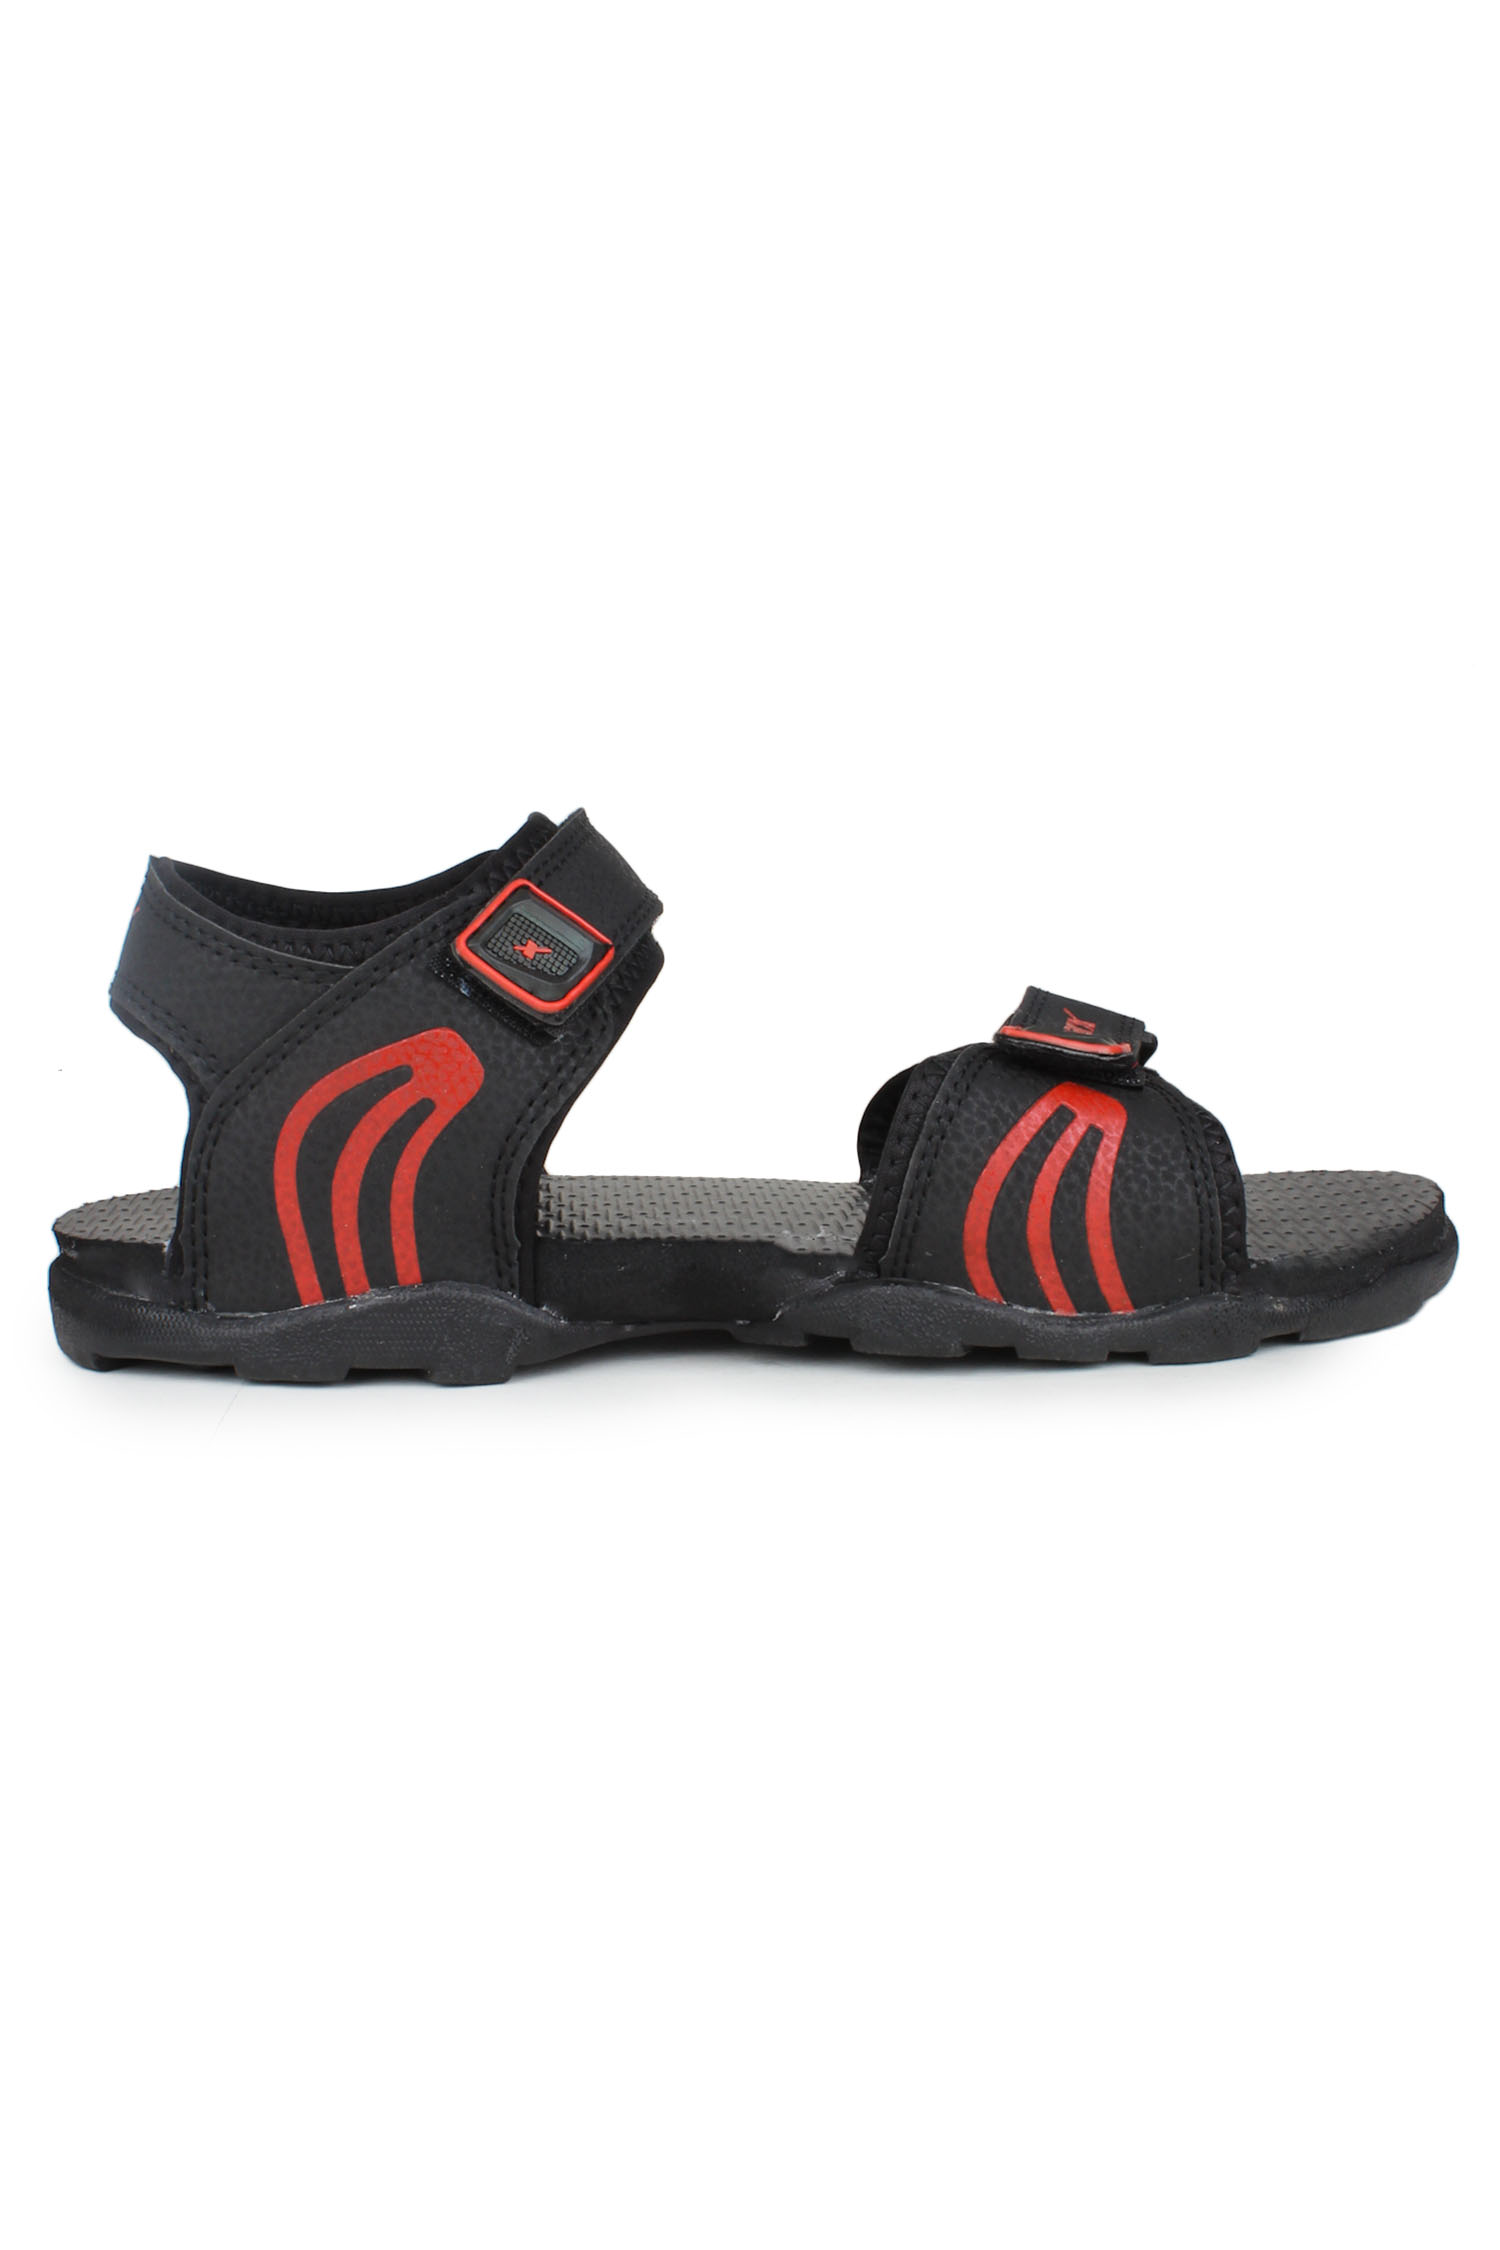 Buy Sparx Men's Black & Red Velcro Floaters Online @ ₹499 from ShopClues